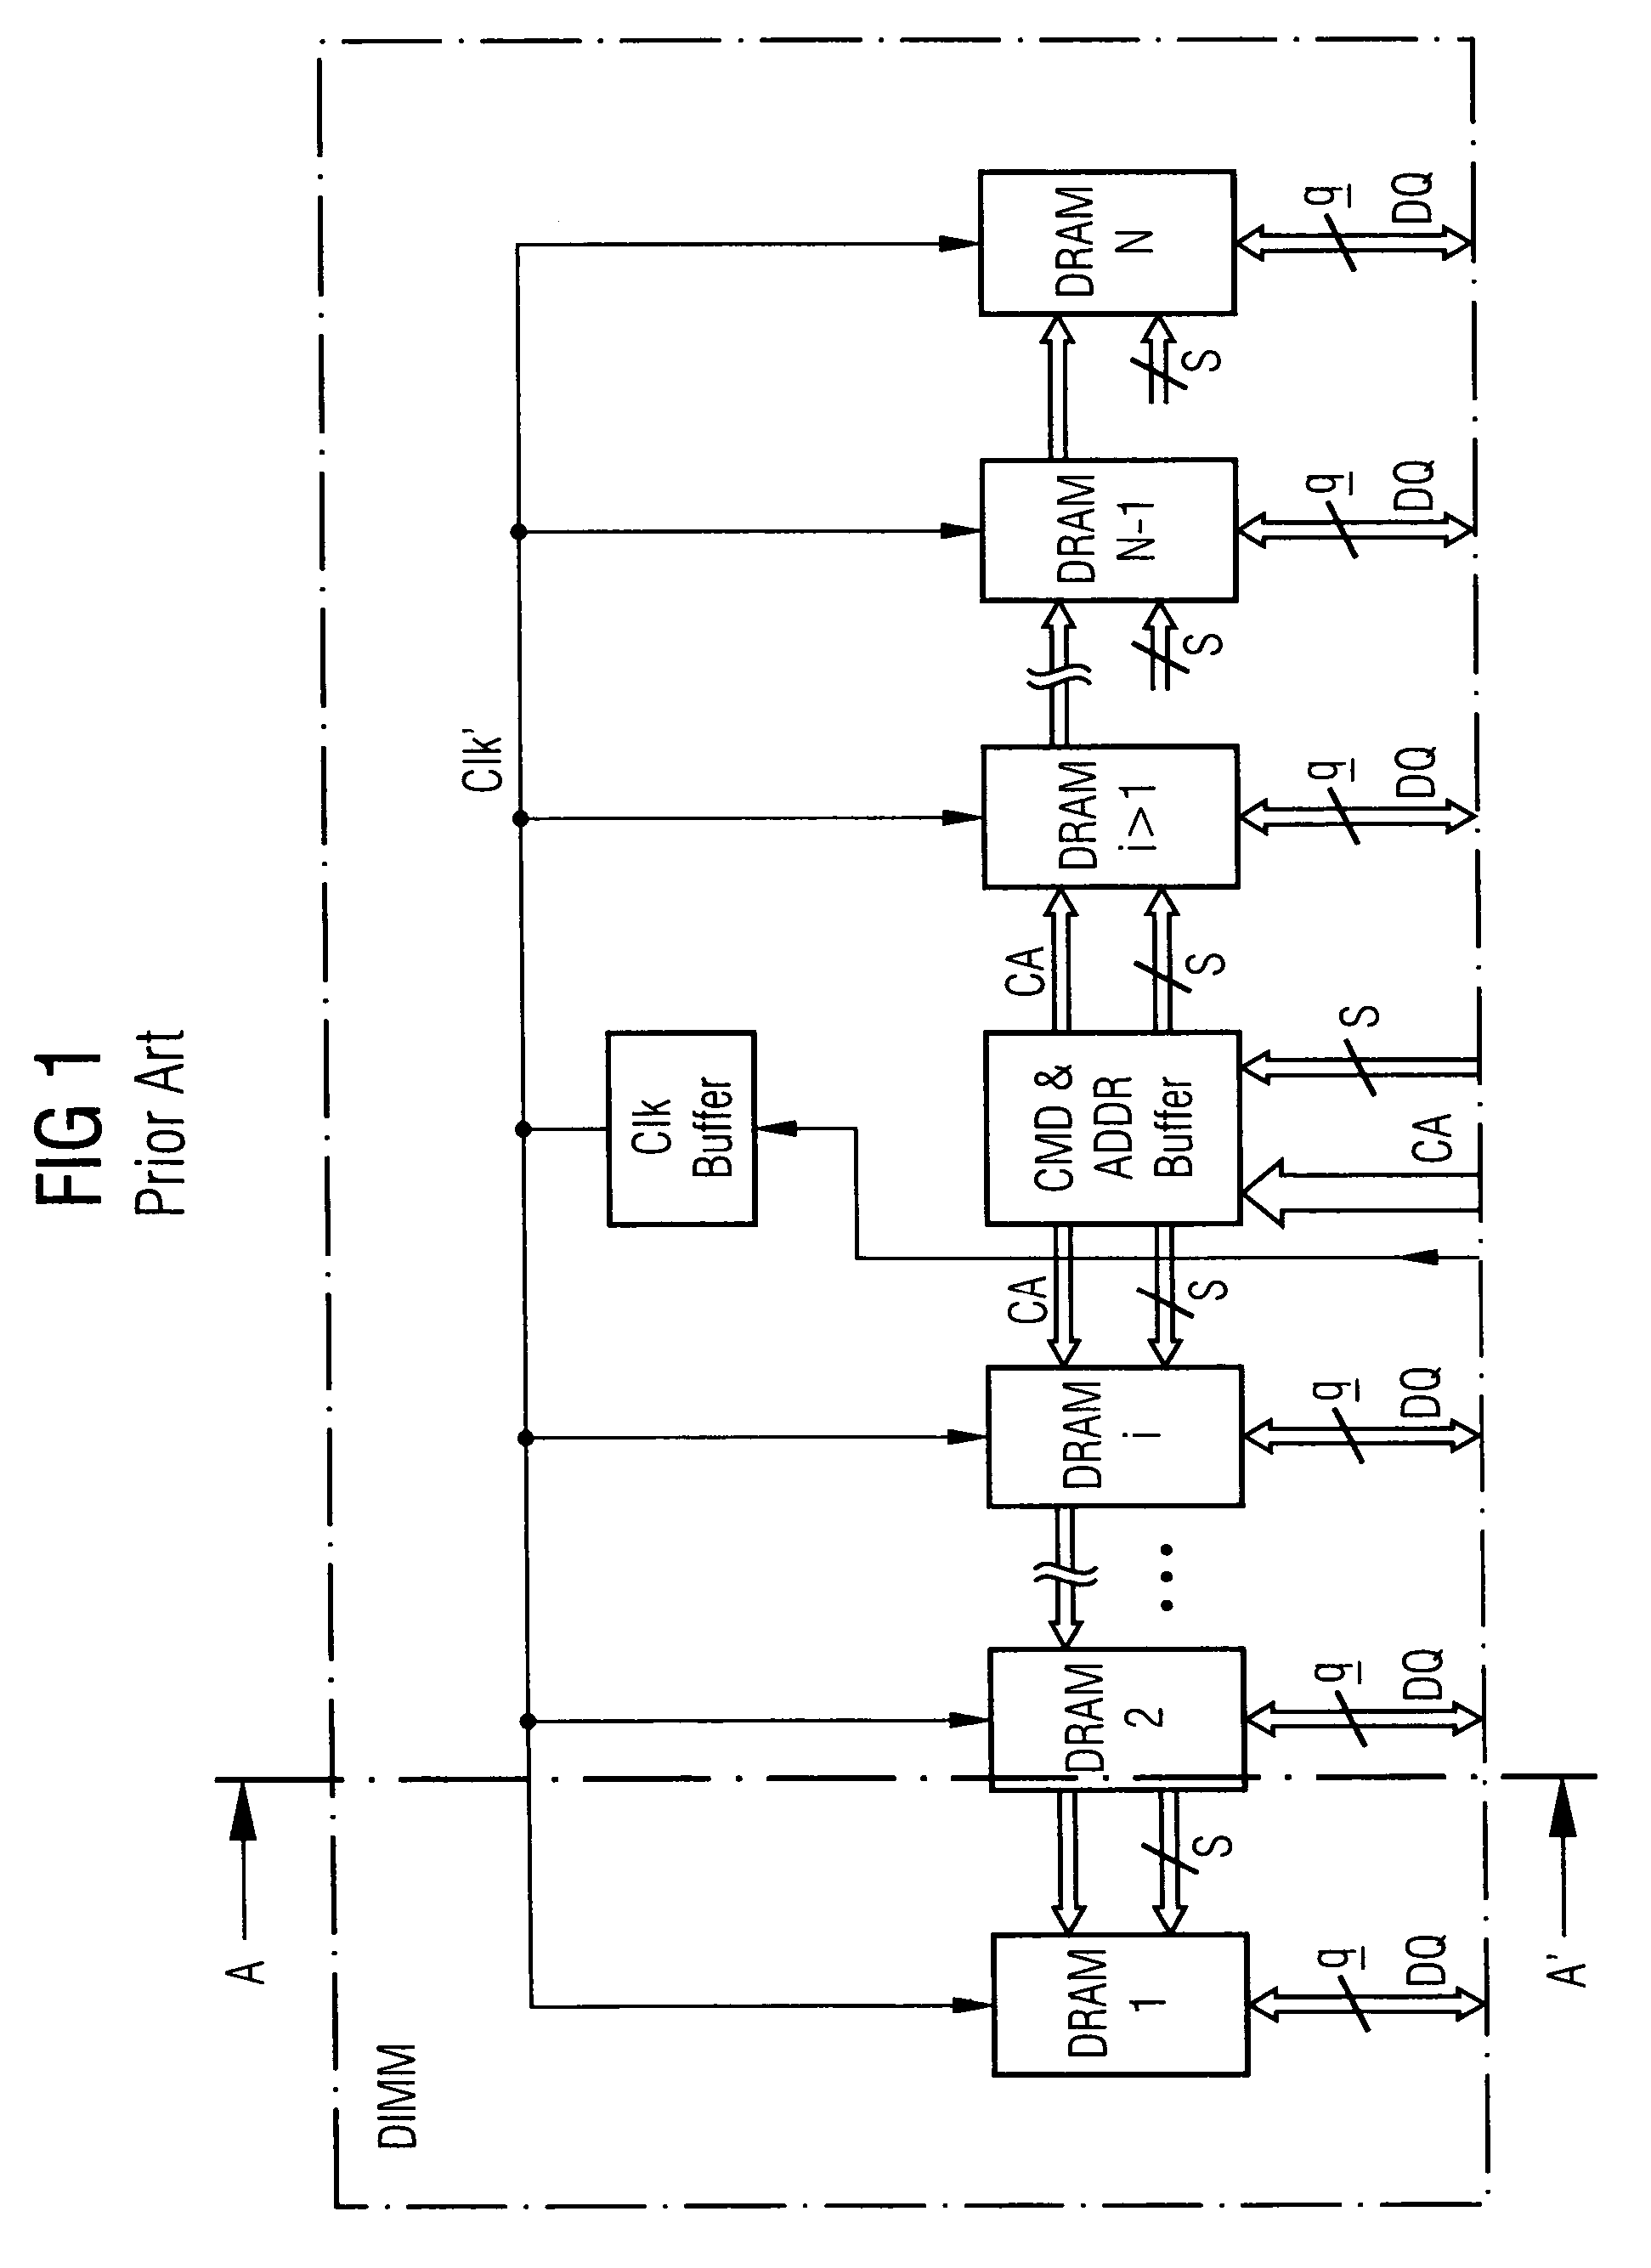 Stacked DRAM memory chip for a dual inline memory module (DIMM)